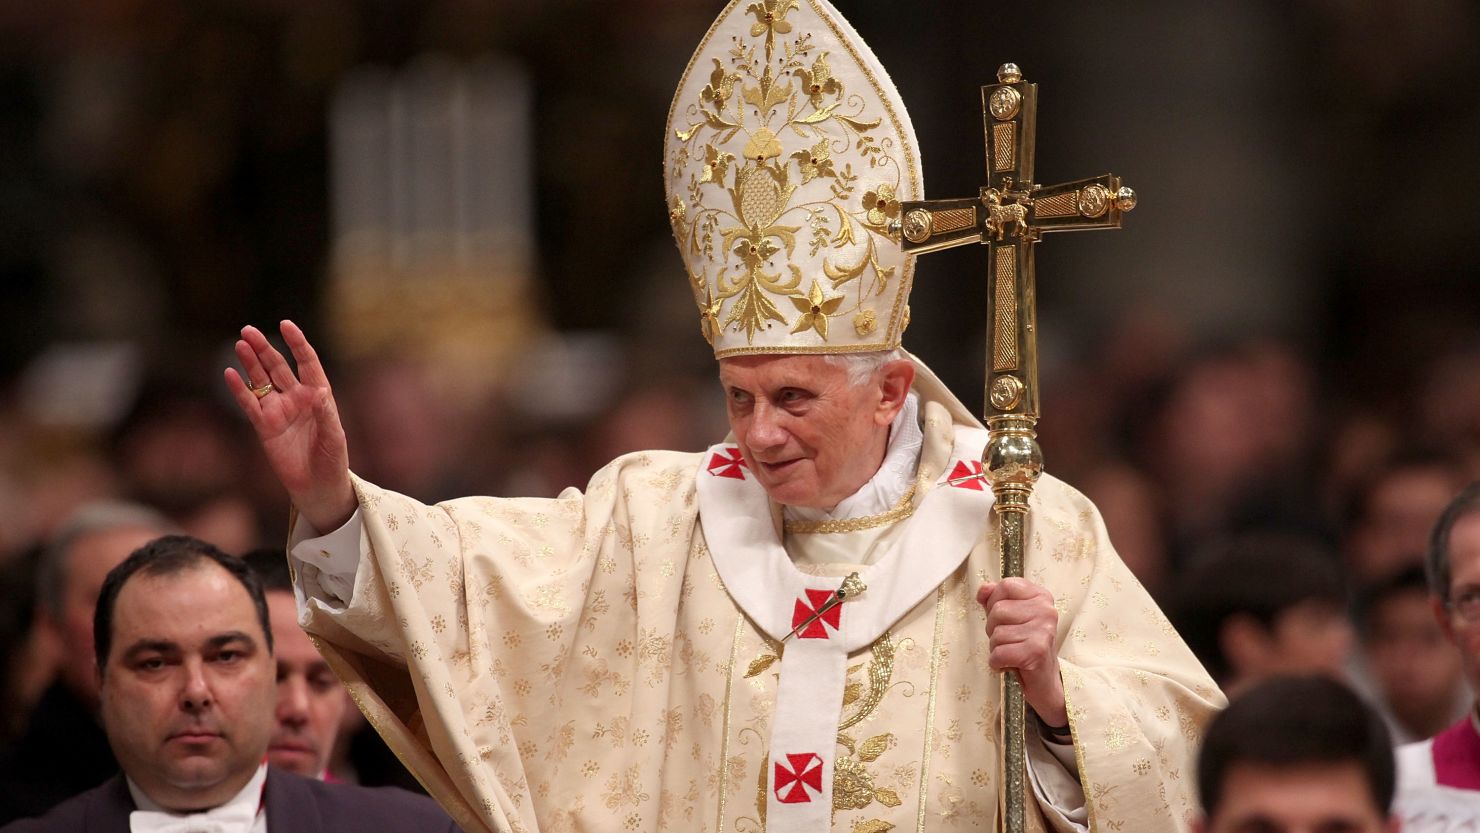 Pope Benedict XVI told the faithful at Midnight Mass that "we must dismount from the high horse of our 'enlightened' reason."